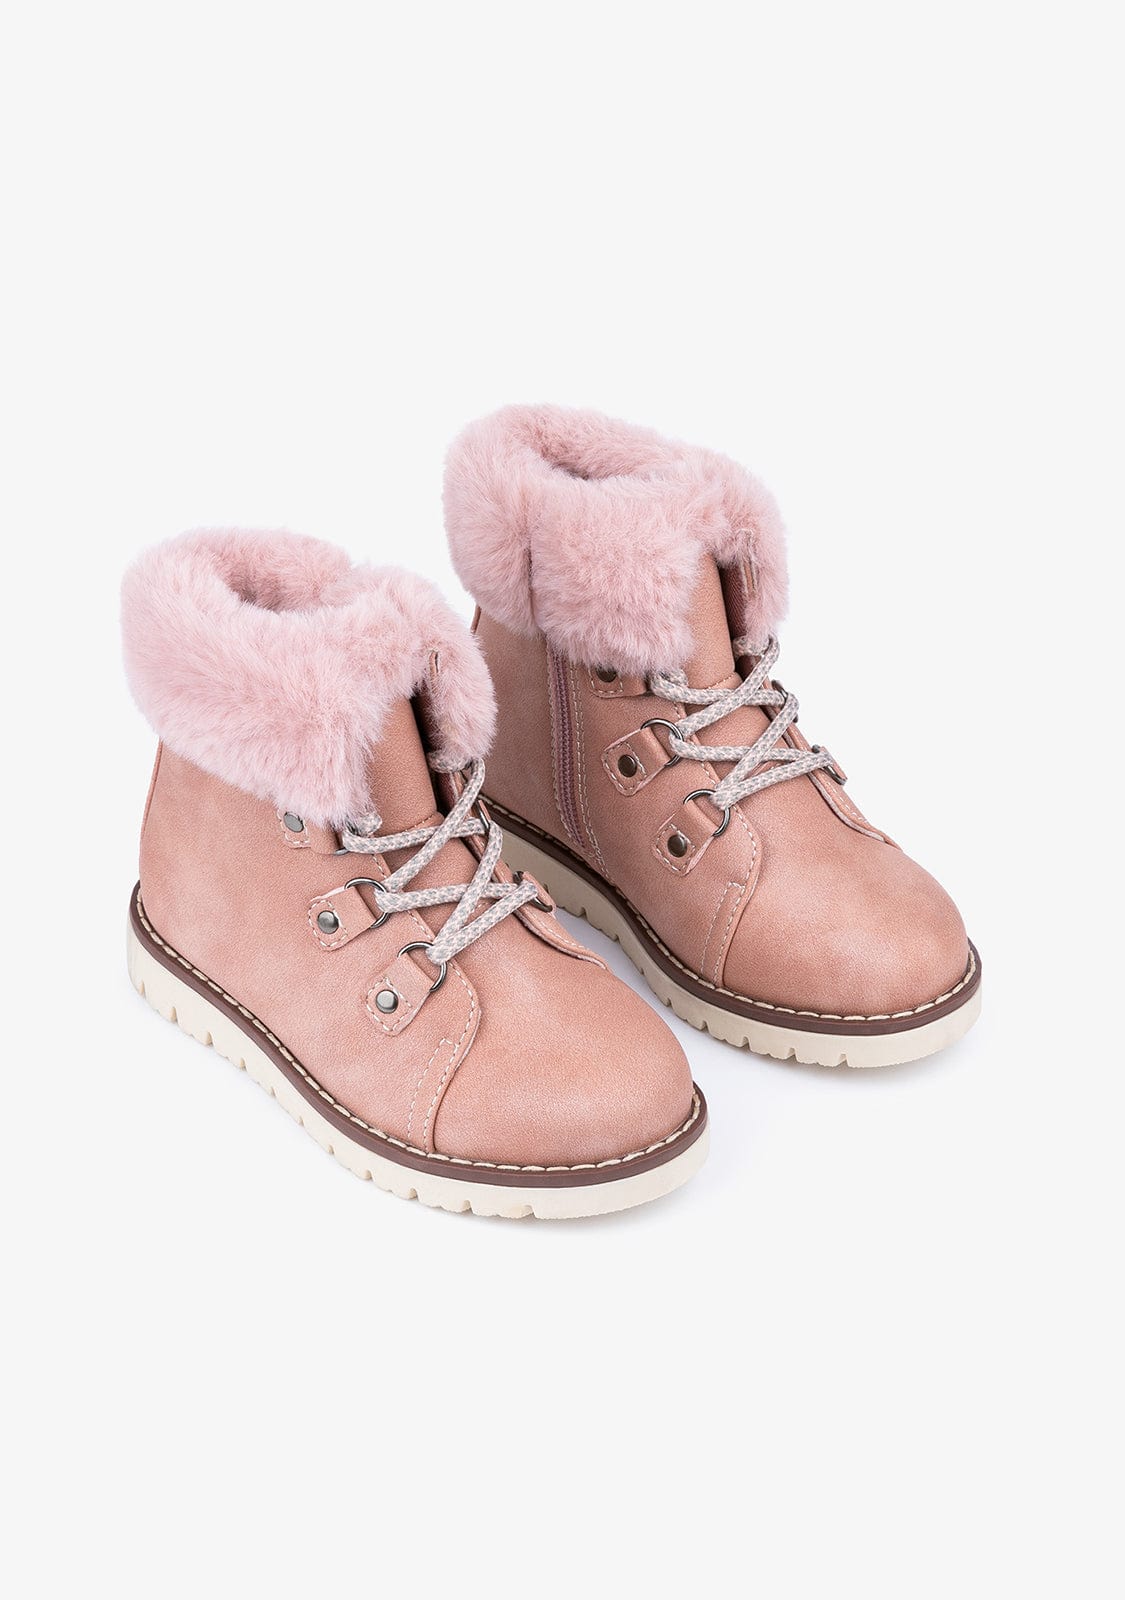 CONGUITOS Shoes Girl's Pink Ankle Boots Nobuck